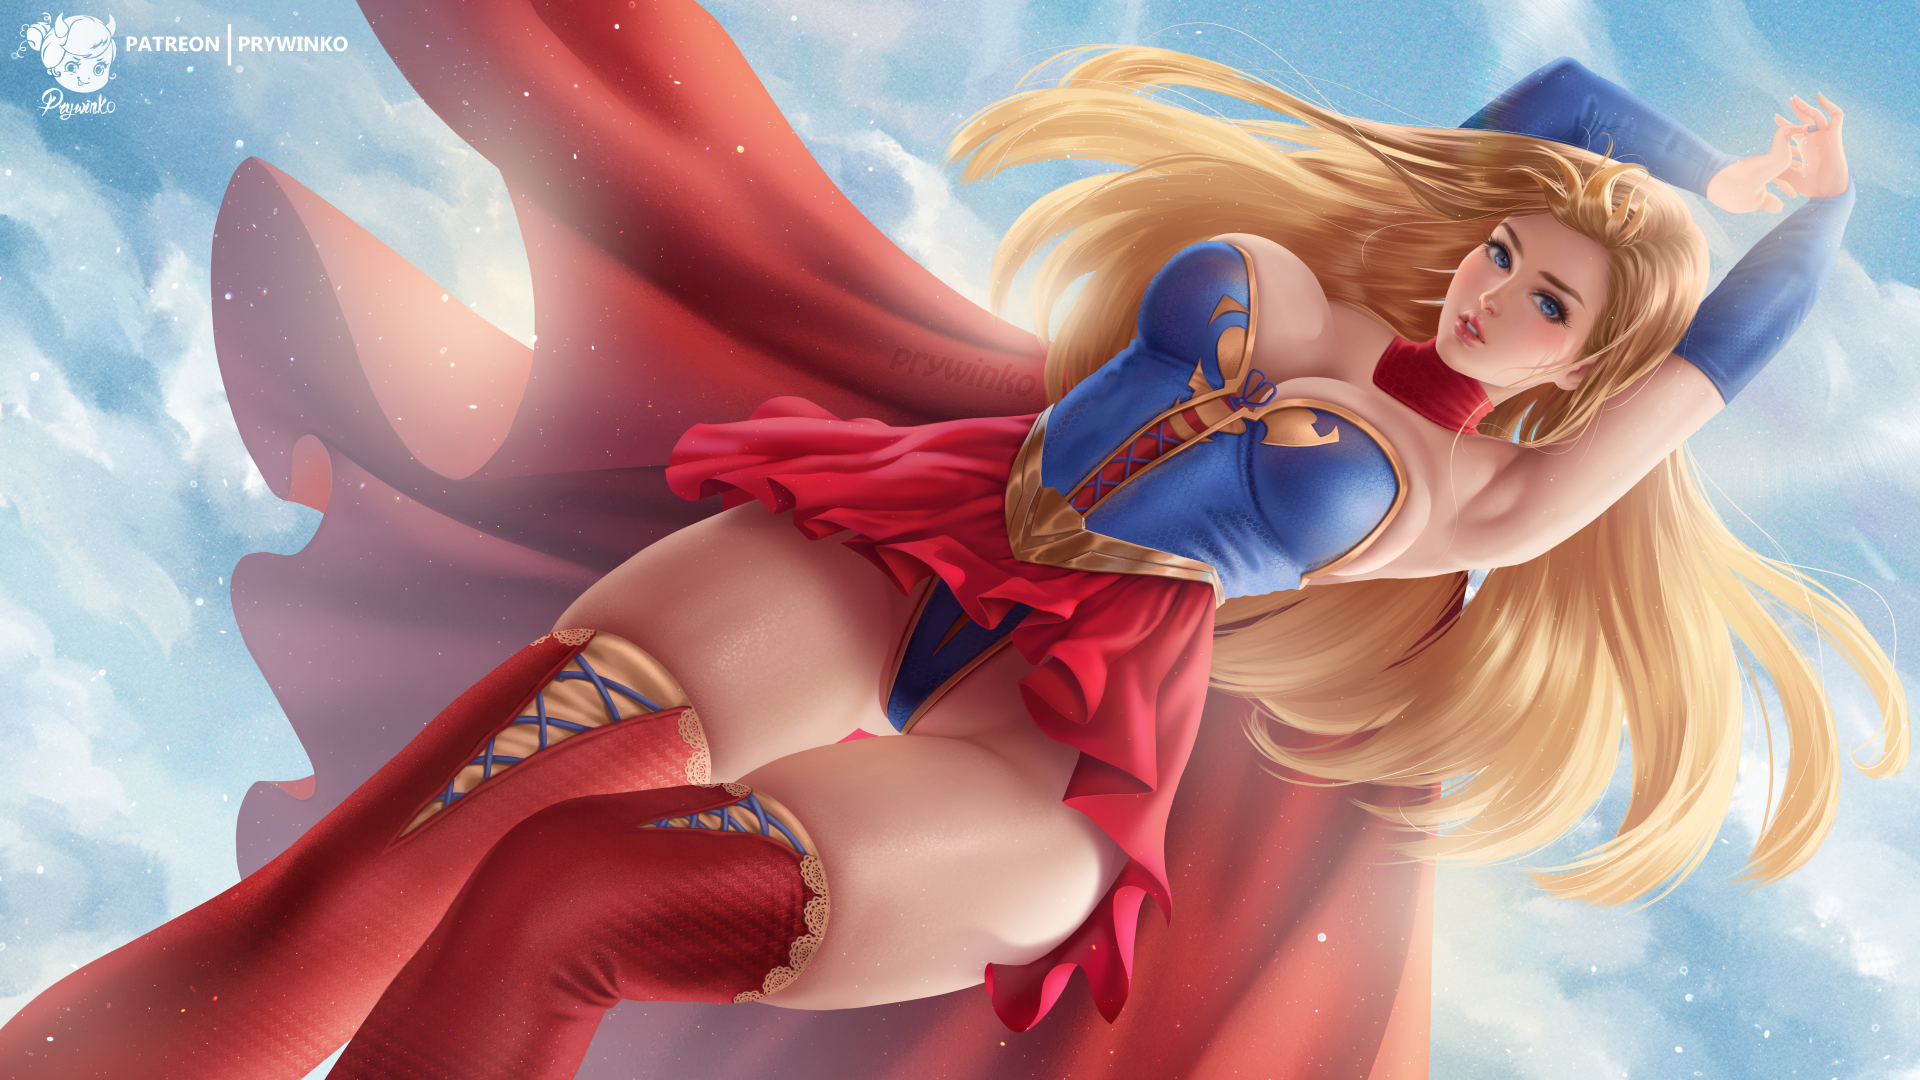 General 1920x1080 Prywinko drawing Supergirl women blonde long hair skimpy clothes cape red clothing thigh-highs skirt cleavage sky digital art watermarked